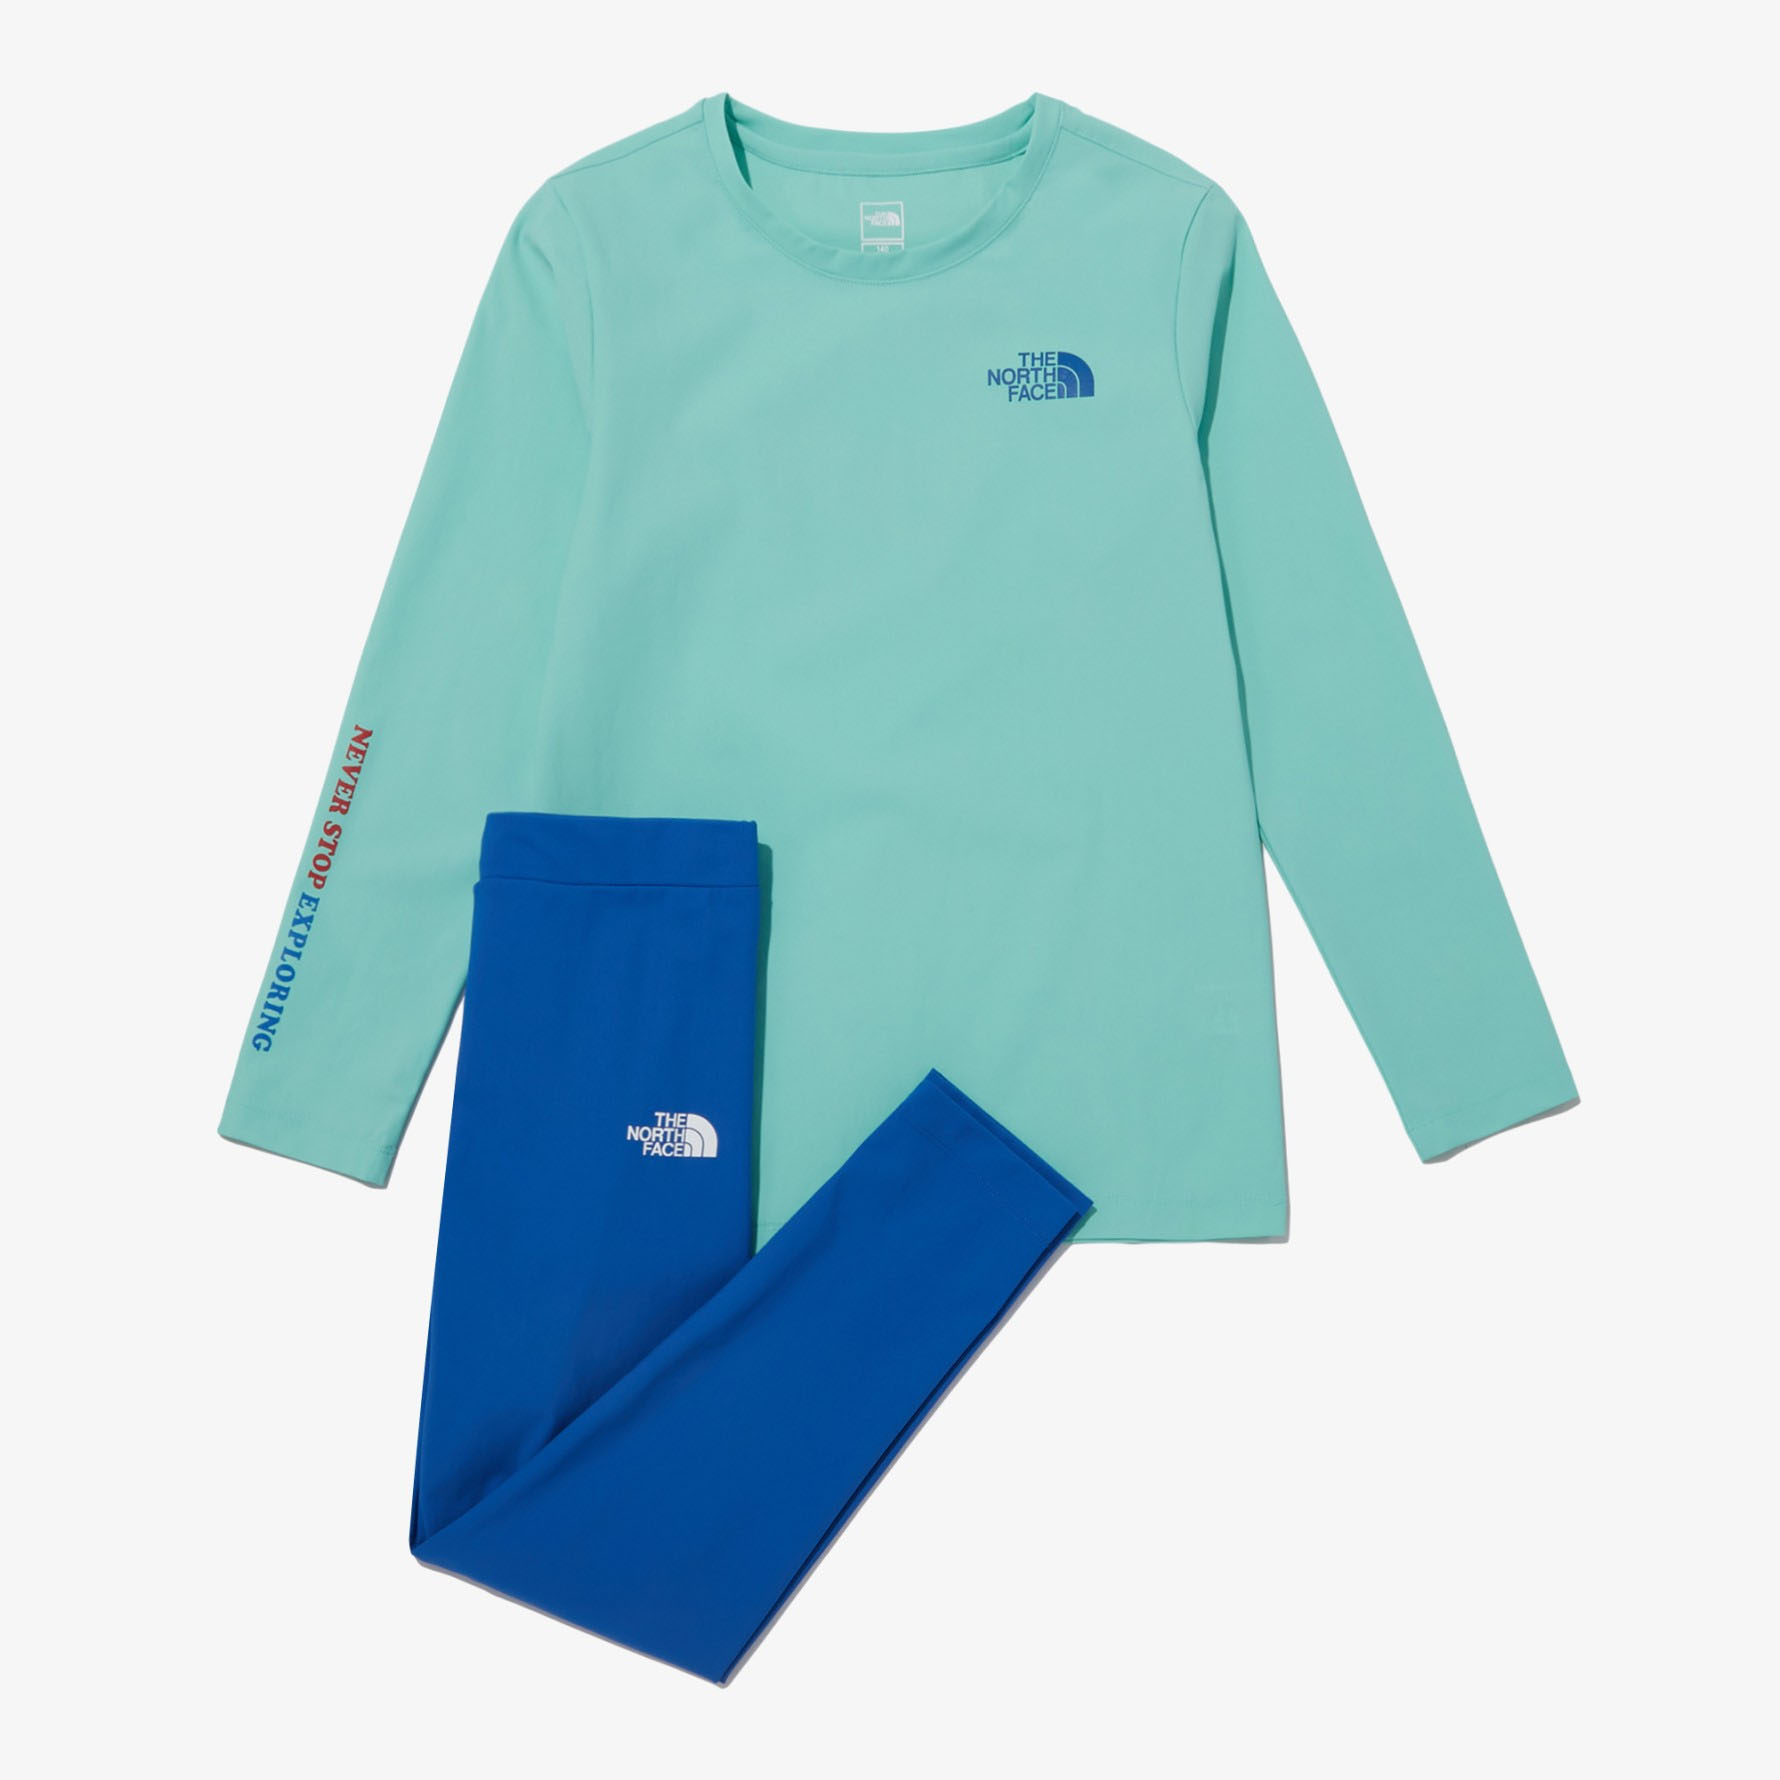 THE NORTH FACE ノースフェイス キッズ セットアップ K'S SUMMER DIVE L/S WATER SET ラッシュガード 水着 レギンス 冷感素材 BLUE GREEN 水遊び NT7TP04S/V｜a-dot｜03